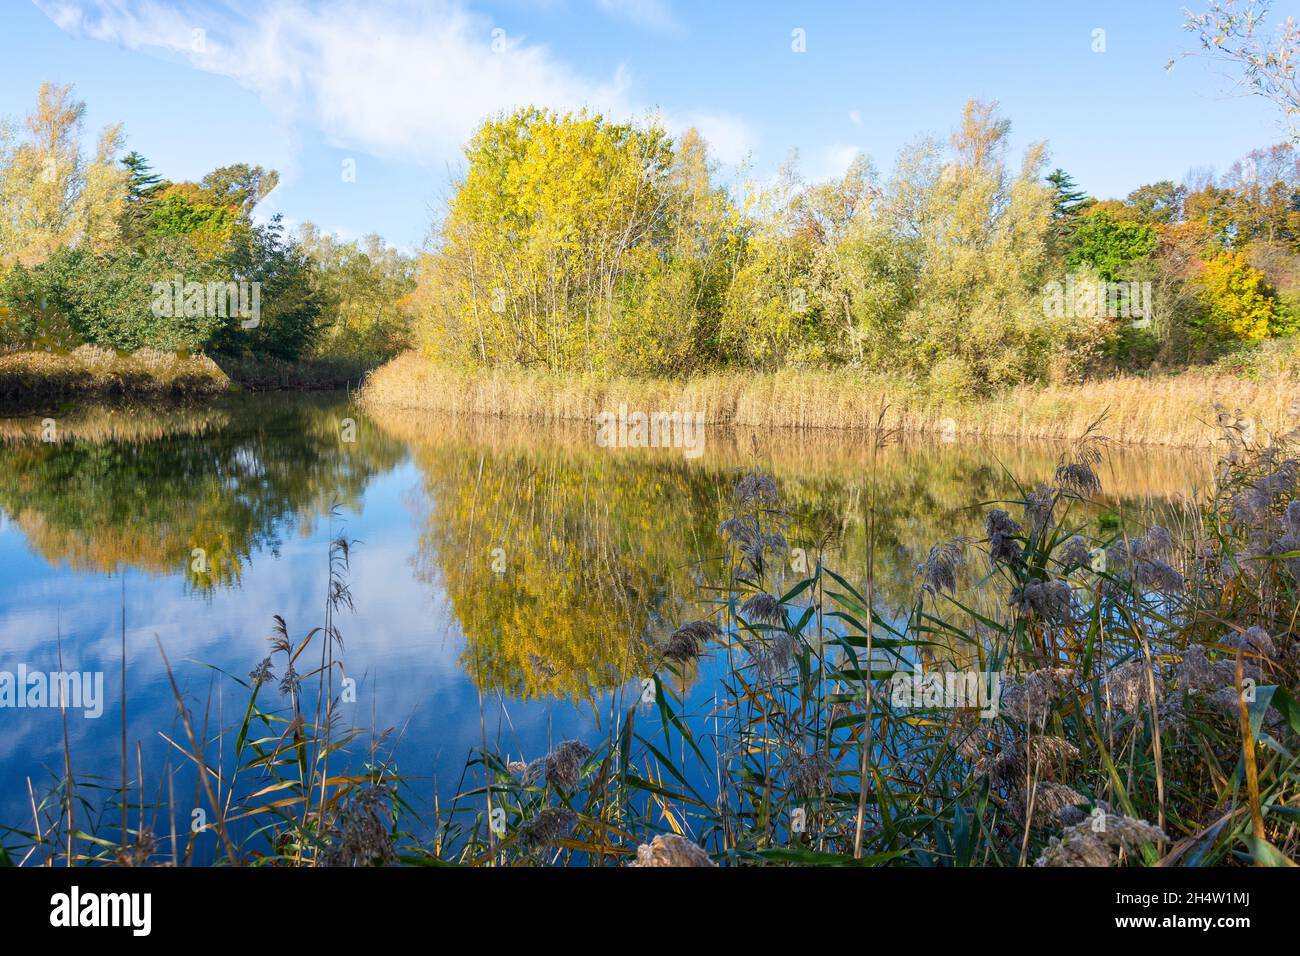 Swan Lake in autumn, Bedfont Lakes Country Park, Bedfont, London Borough of Hounslow, Greater London, England, United Kingdom Stock Photo